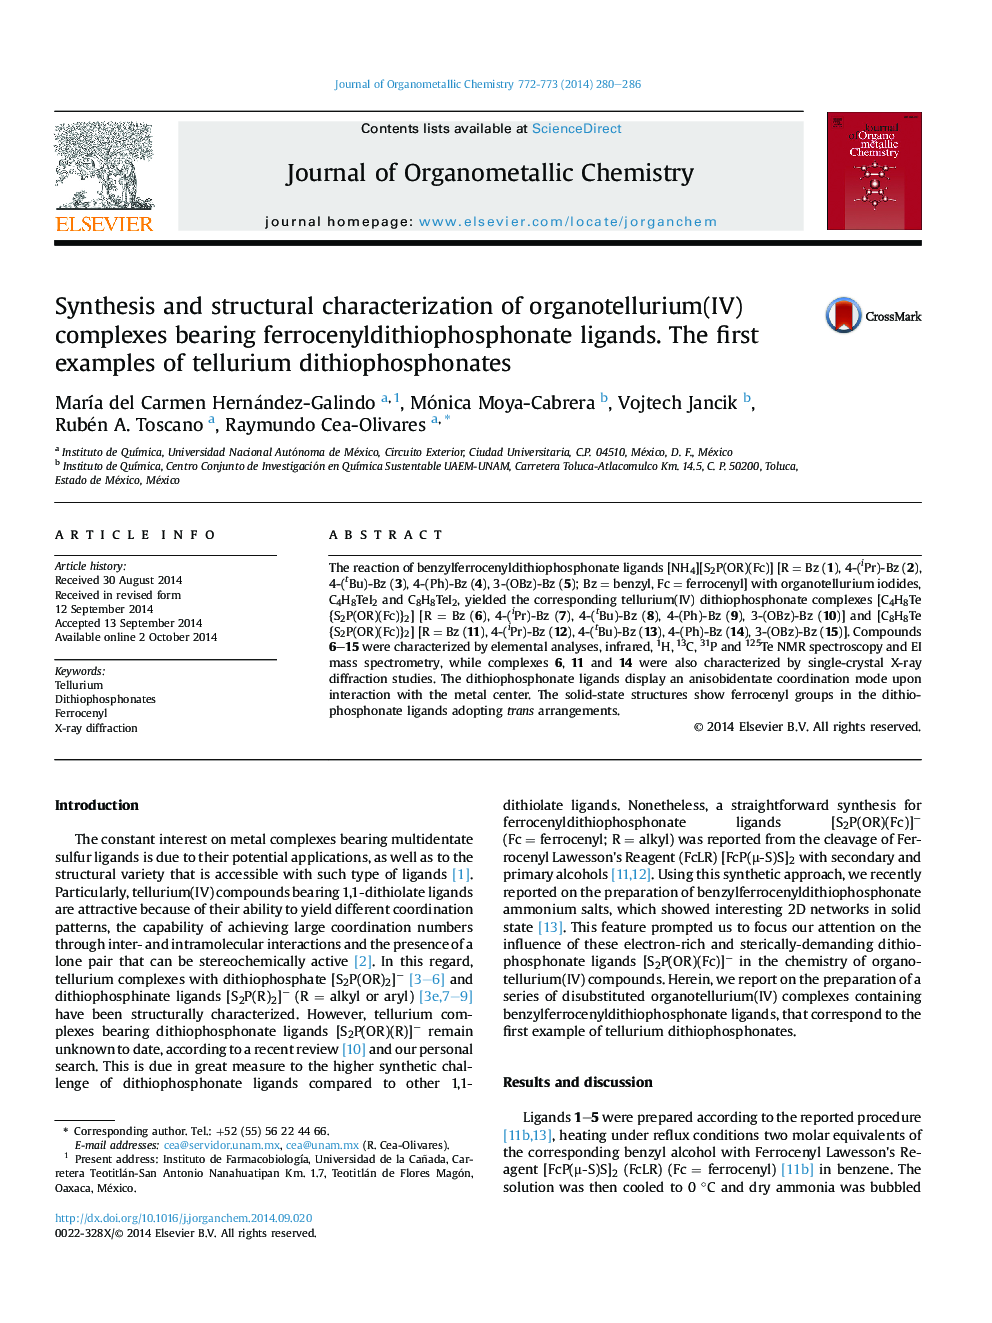 Synthesis and structural characterization of organotellurium(IV) complexes bearing ferrocenyldithiophosphonate ligands. The first examples of tellurium dithiophosphonates